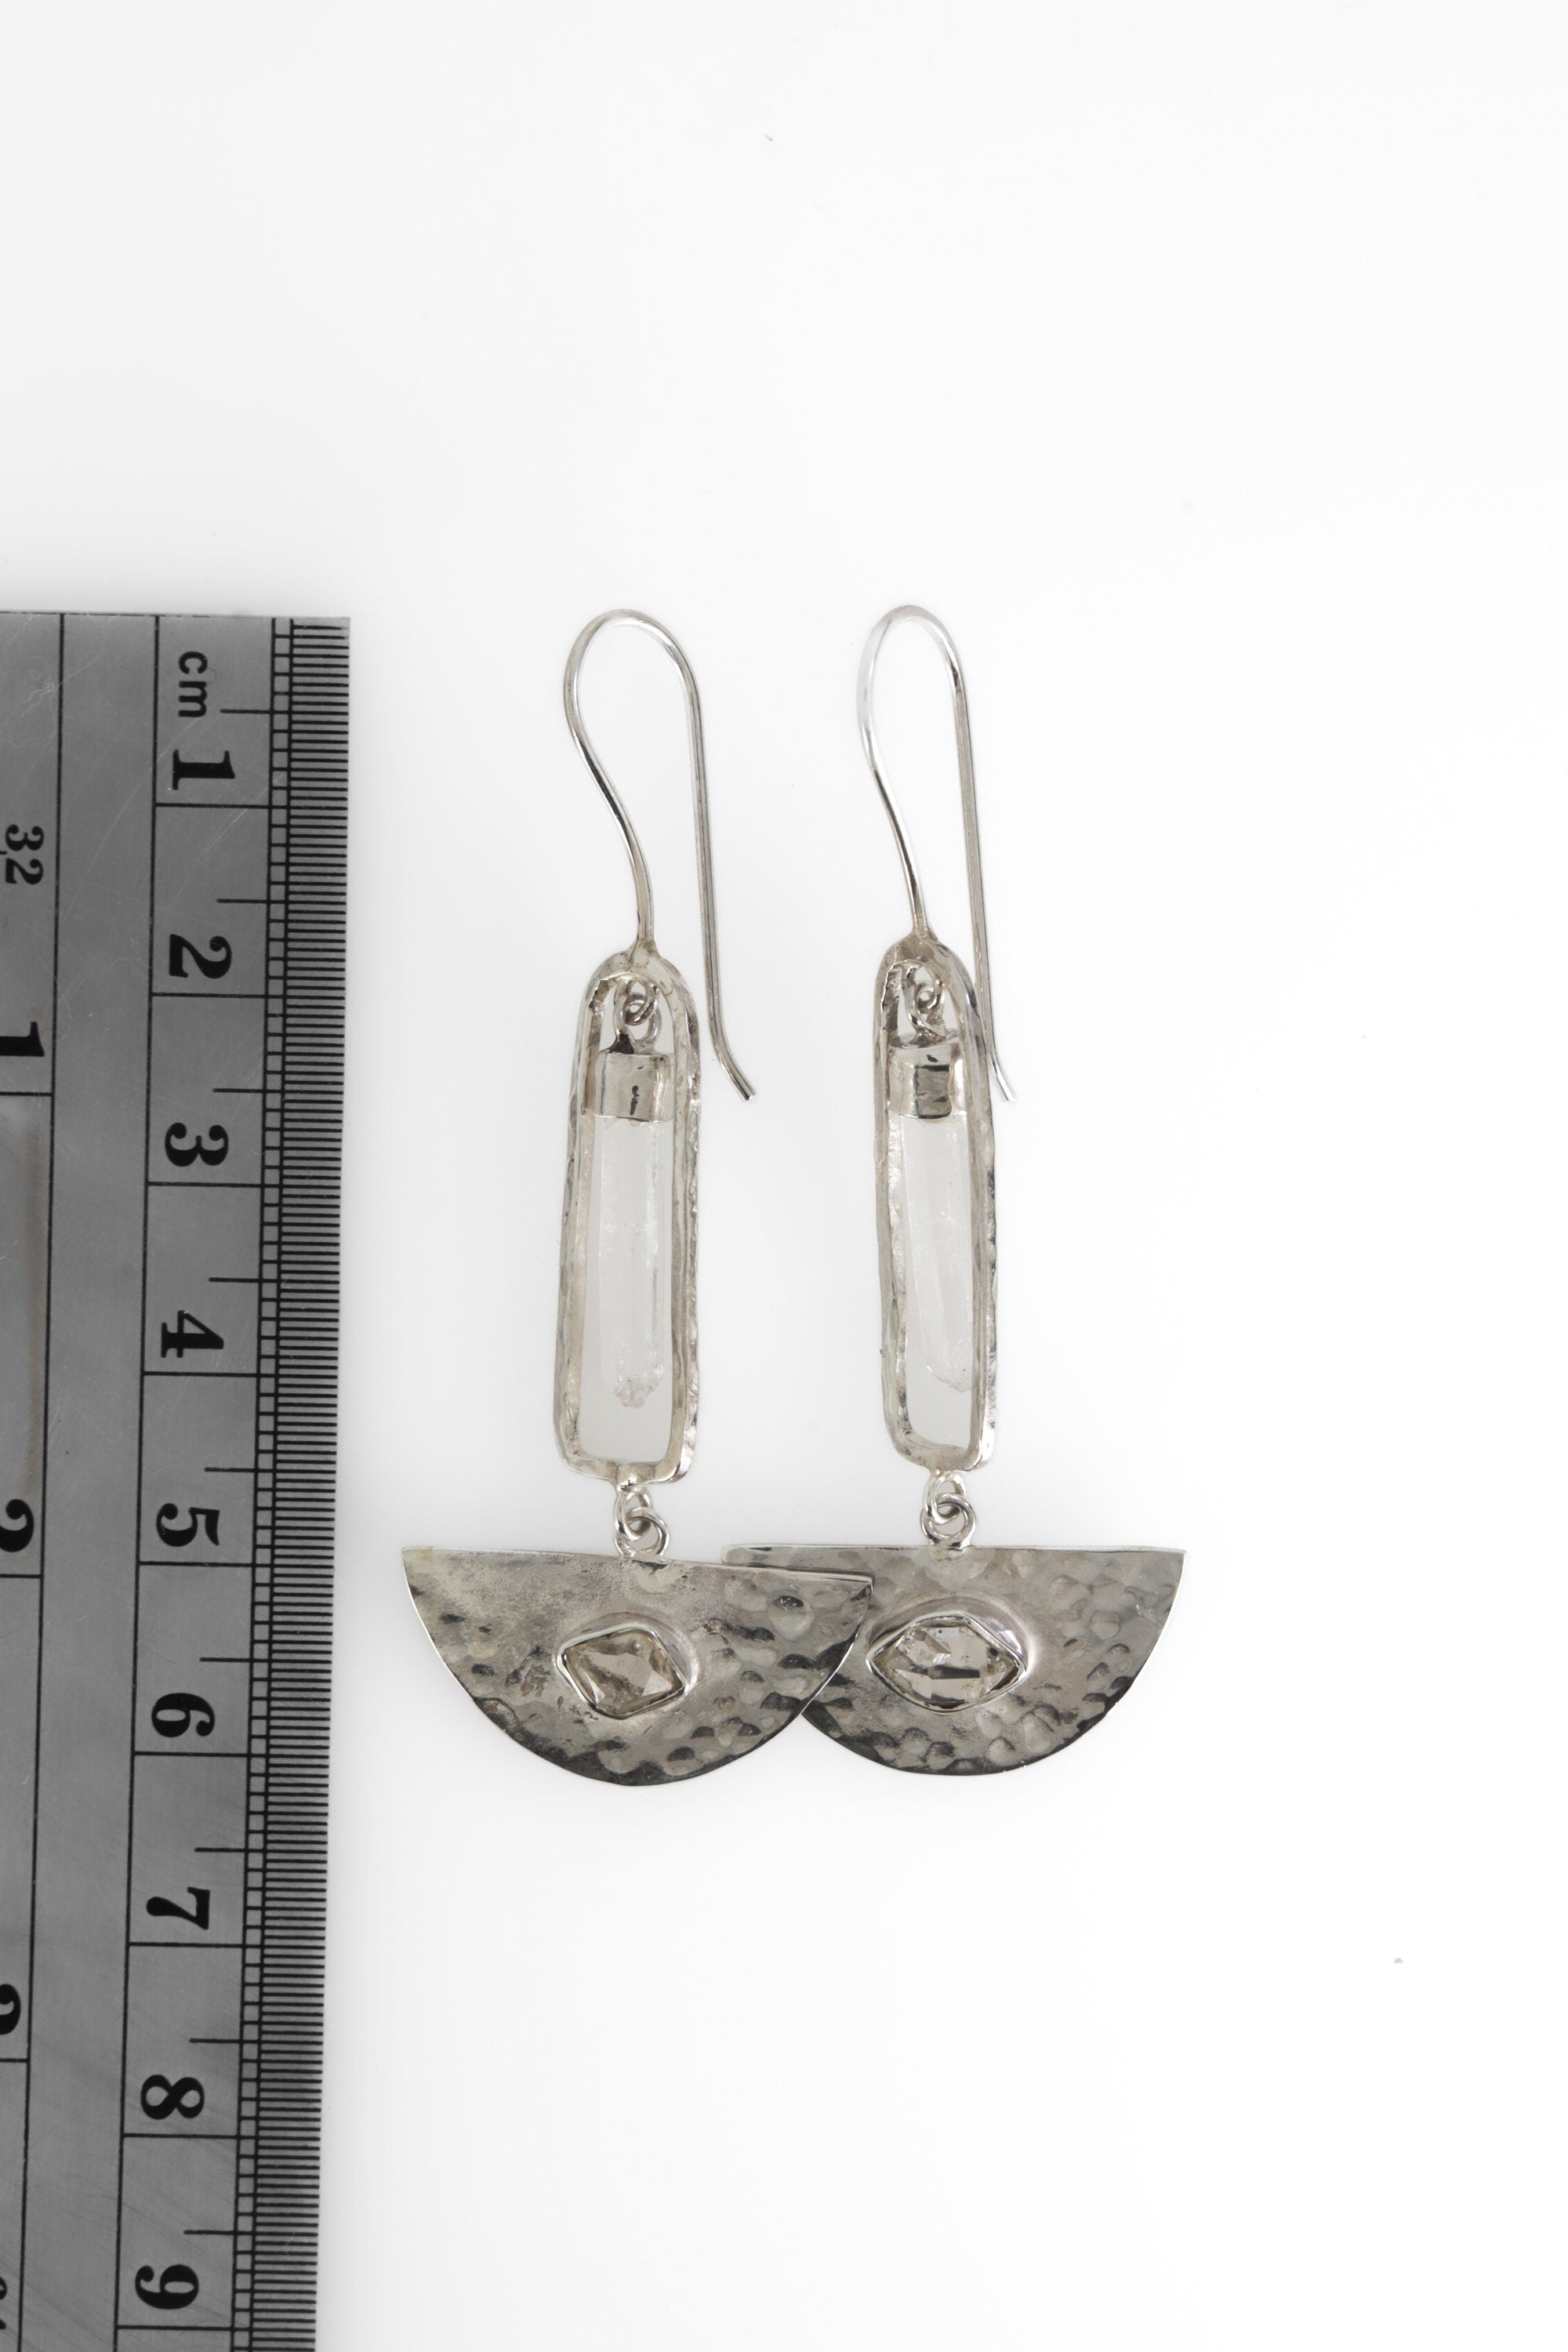 Art Deco Dangle Earrings with Aquamarine & Herkimer Diamonds, Shiny Hammered Texture, 925 Sterling Silver, Elegant Crystal Earring